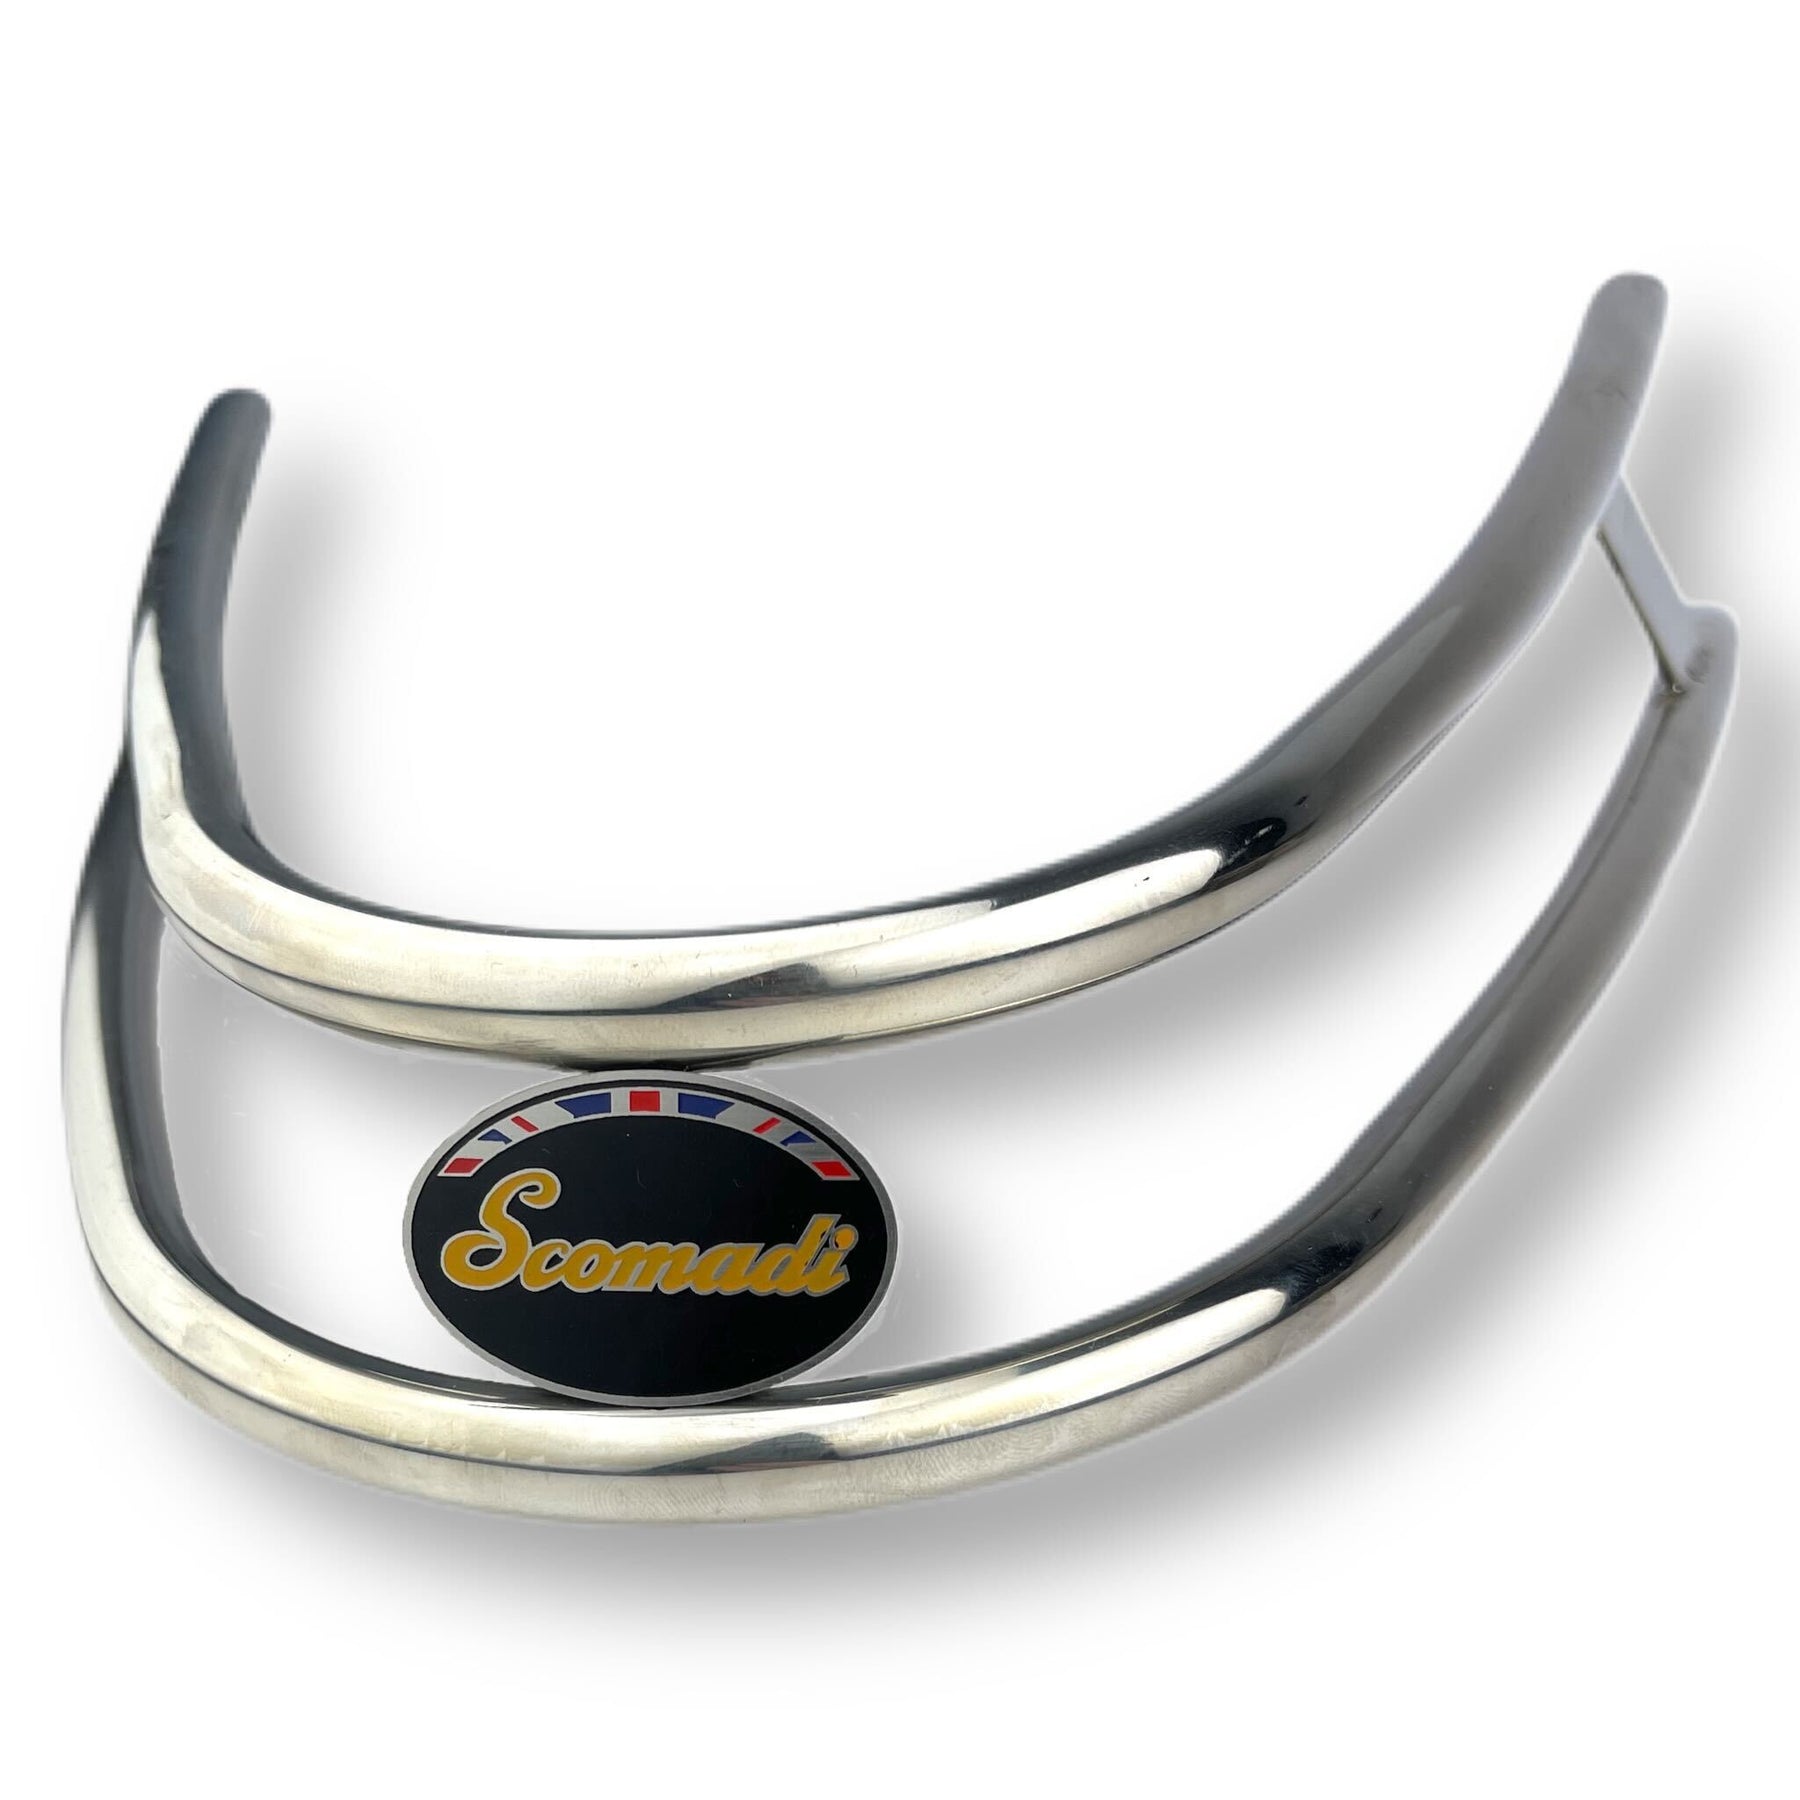 Scomadi Royal Alloy Front Bumper Bar - Double Trim - Polished Stainless Steel